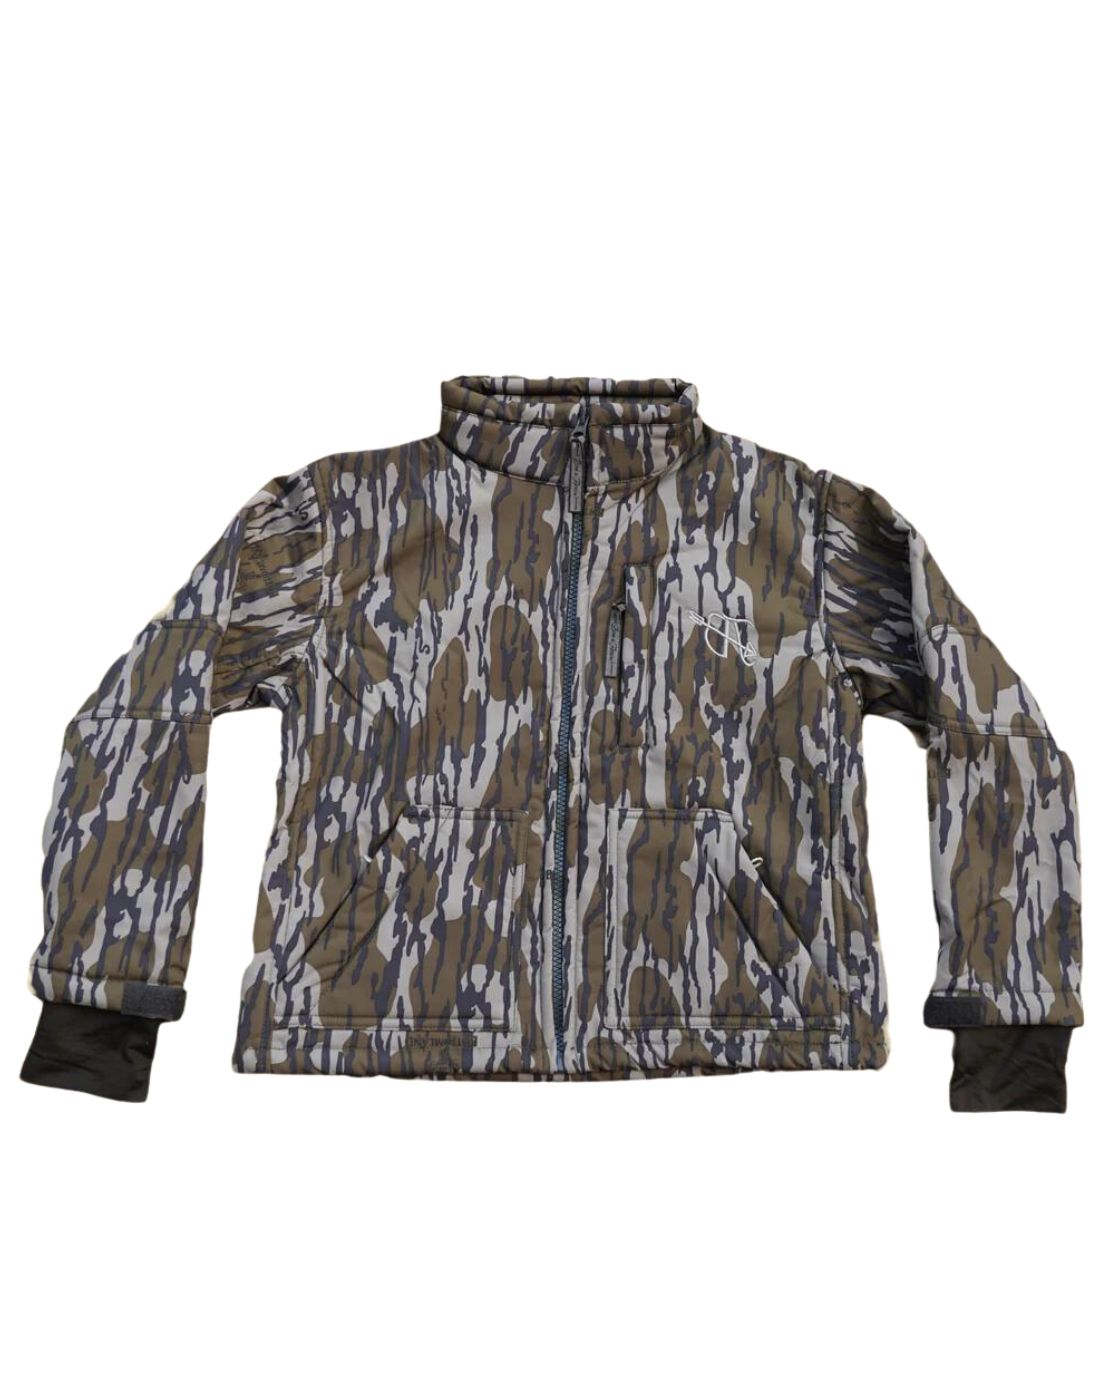 Youth Heavy Weight Hunting Jacket by Bow and Arrow Outdoors - Sportsman Gear